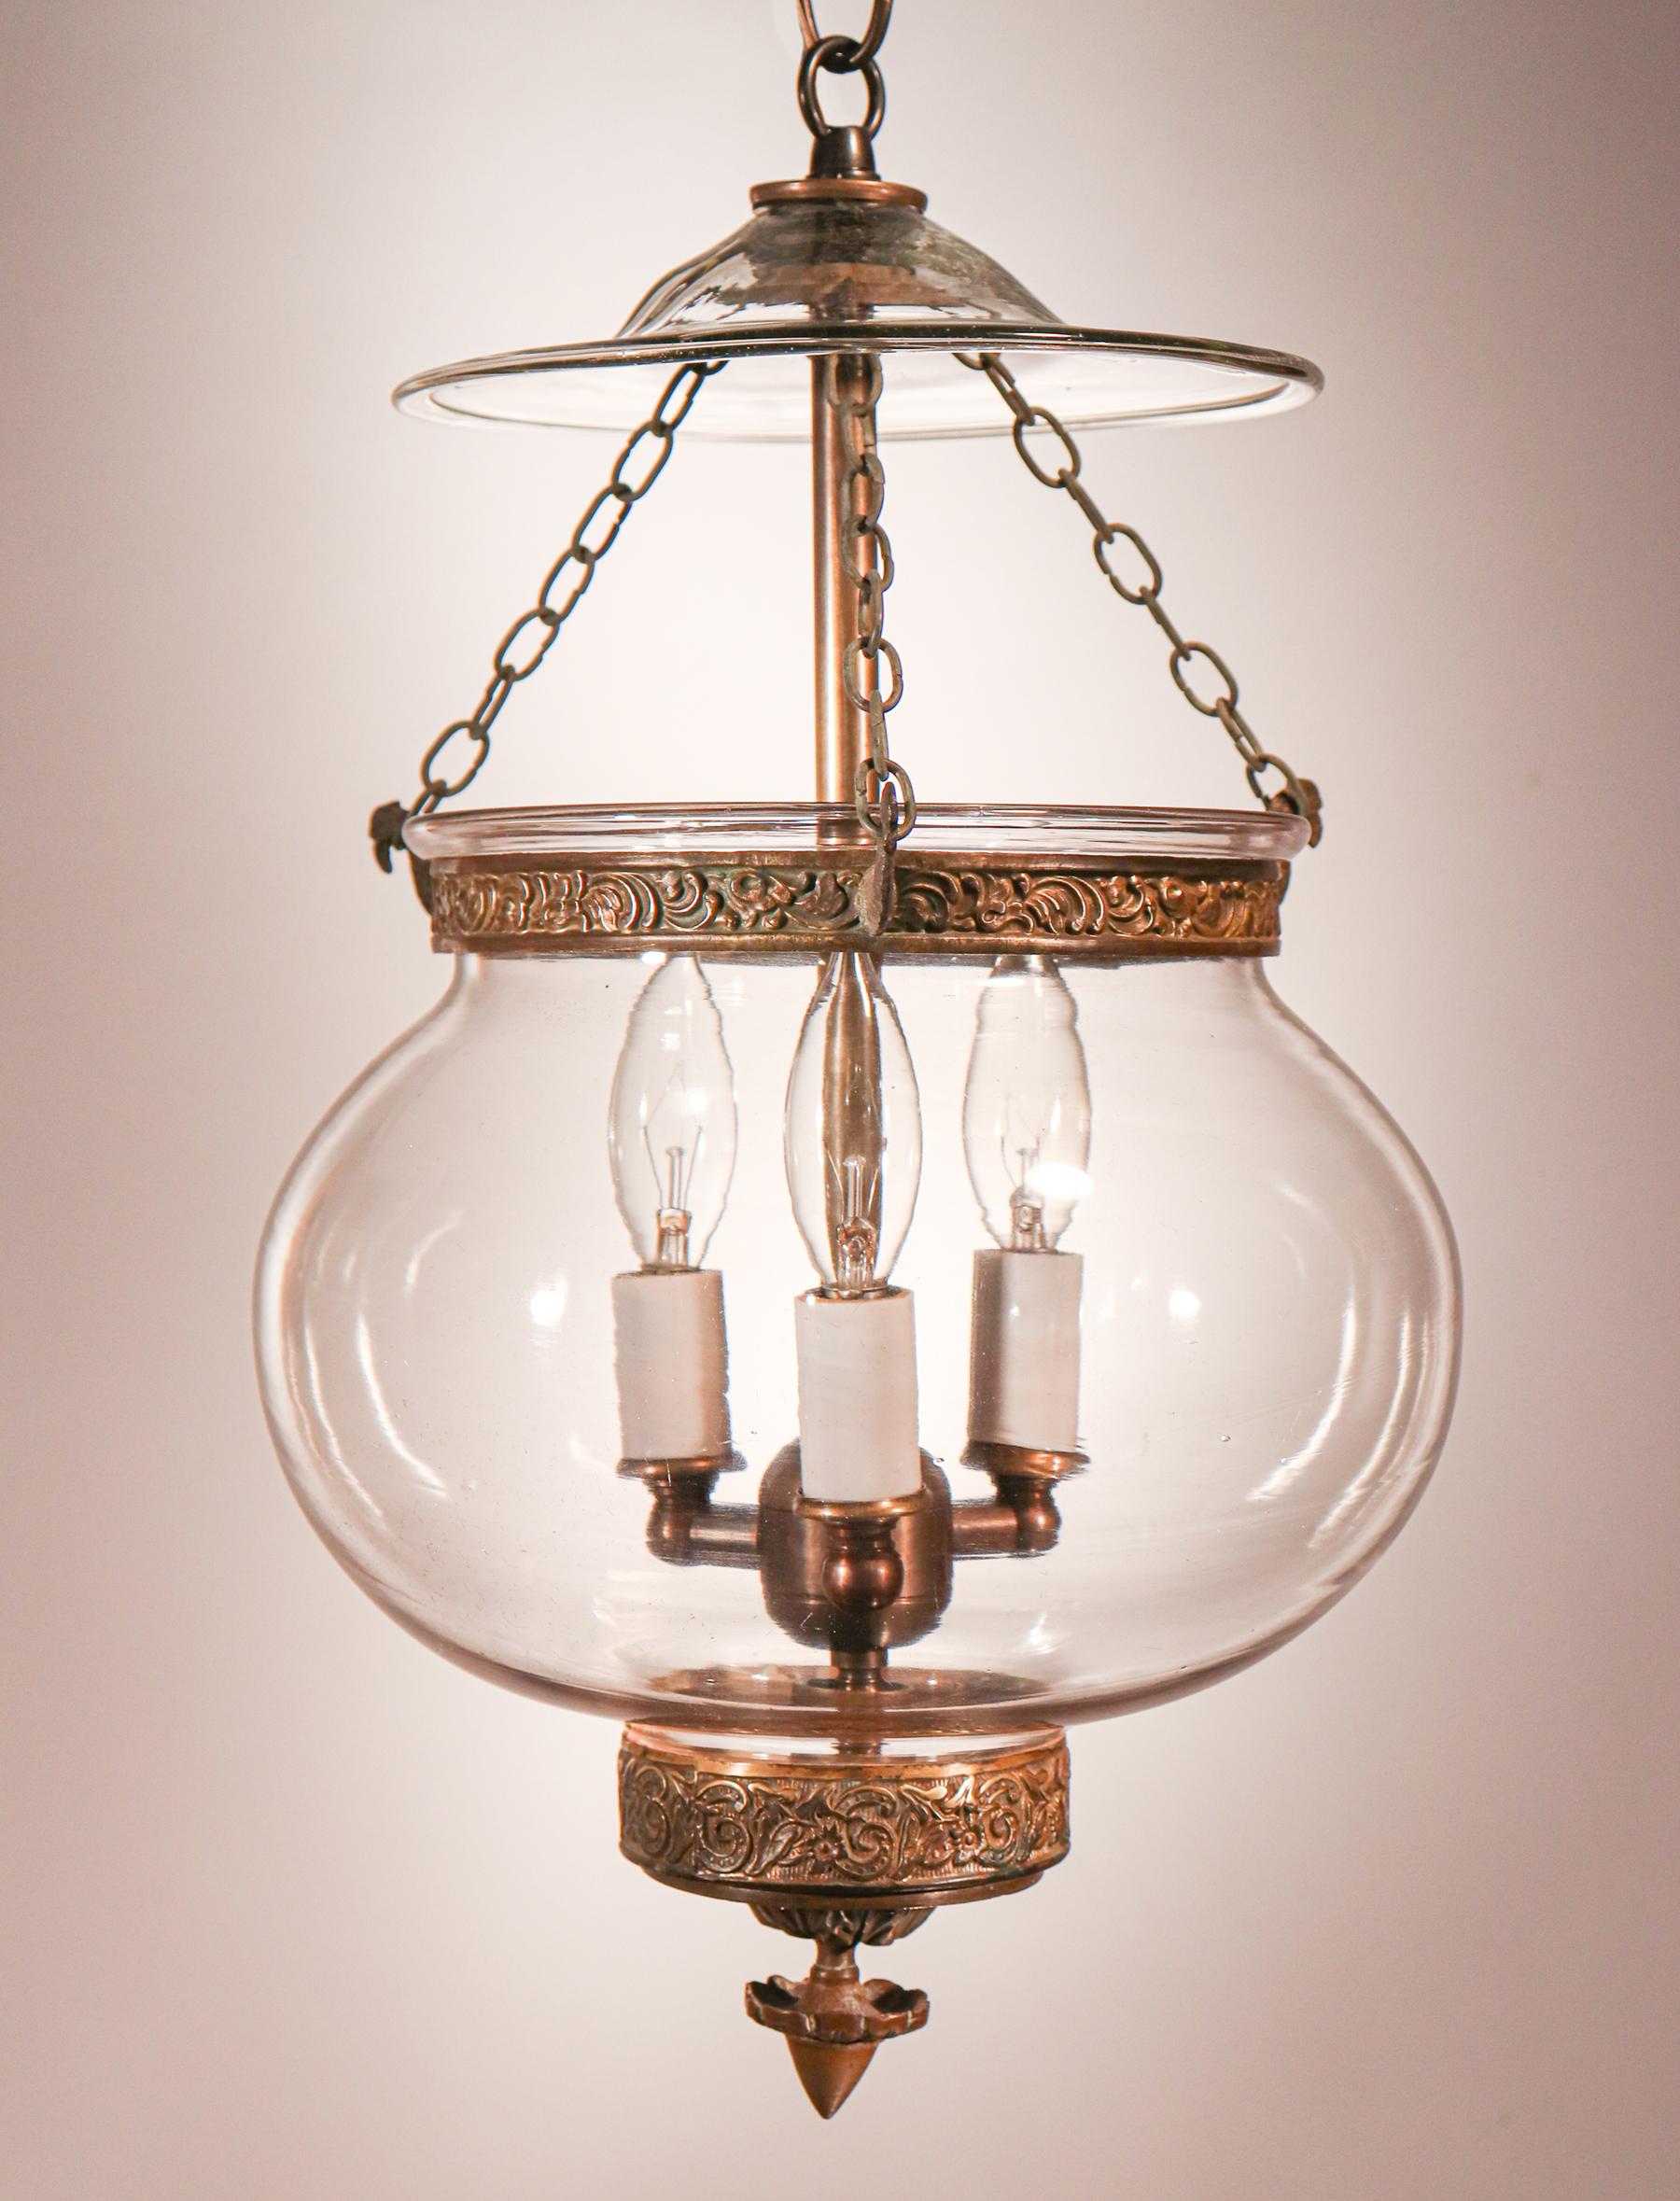 A truly beautiful antique globe bell jar lantern, this circa 1870 pendant features excellent quality hand blown glass (replete with desirable swirls and air bubbles) and all-original brass fittings—including its embossed band and finial/candle